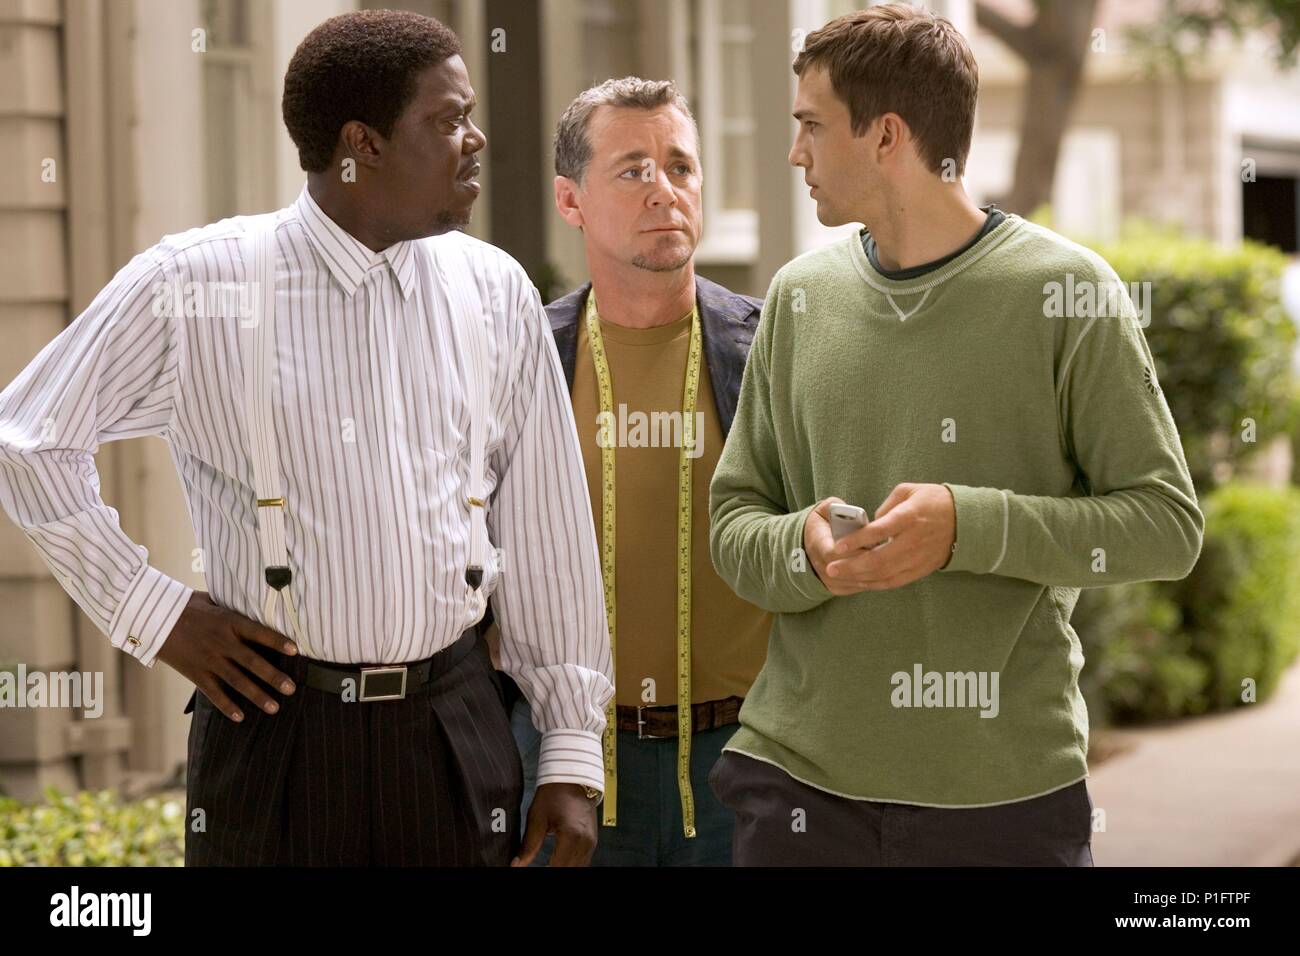 Original Film Title: GUESS WHO?. Title: GUESS WHO?. Director: KEVIN RODNEY SULLIVAN. Year: 2005. Stars: ASHTON KUTCHER; BERNIE MAC; CURTIS-BROWN. Credit: COLUMBIA PICTURES / Album Stock Photo - Alamy